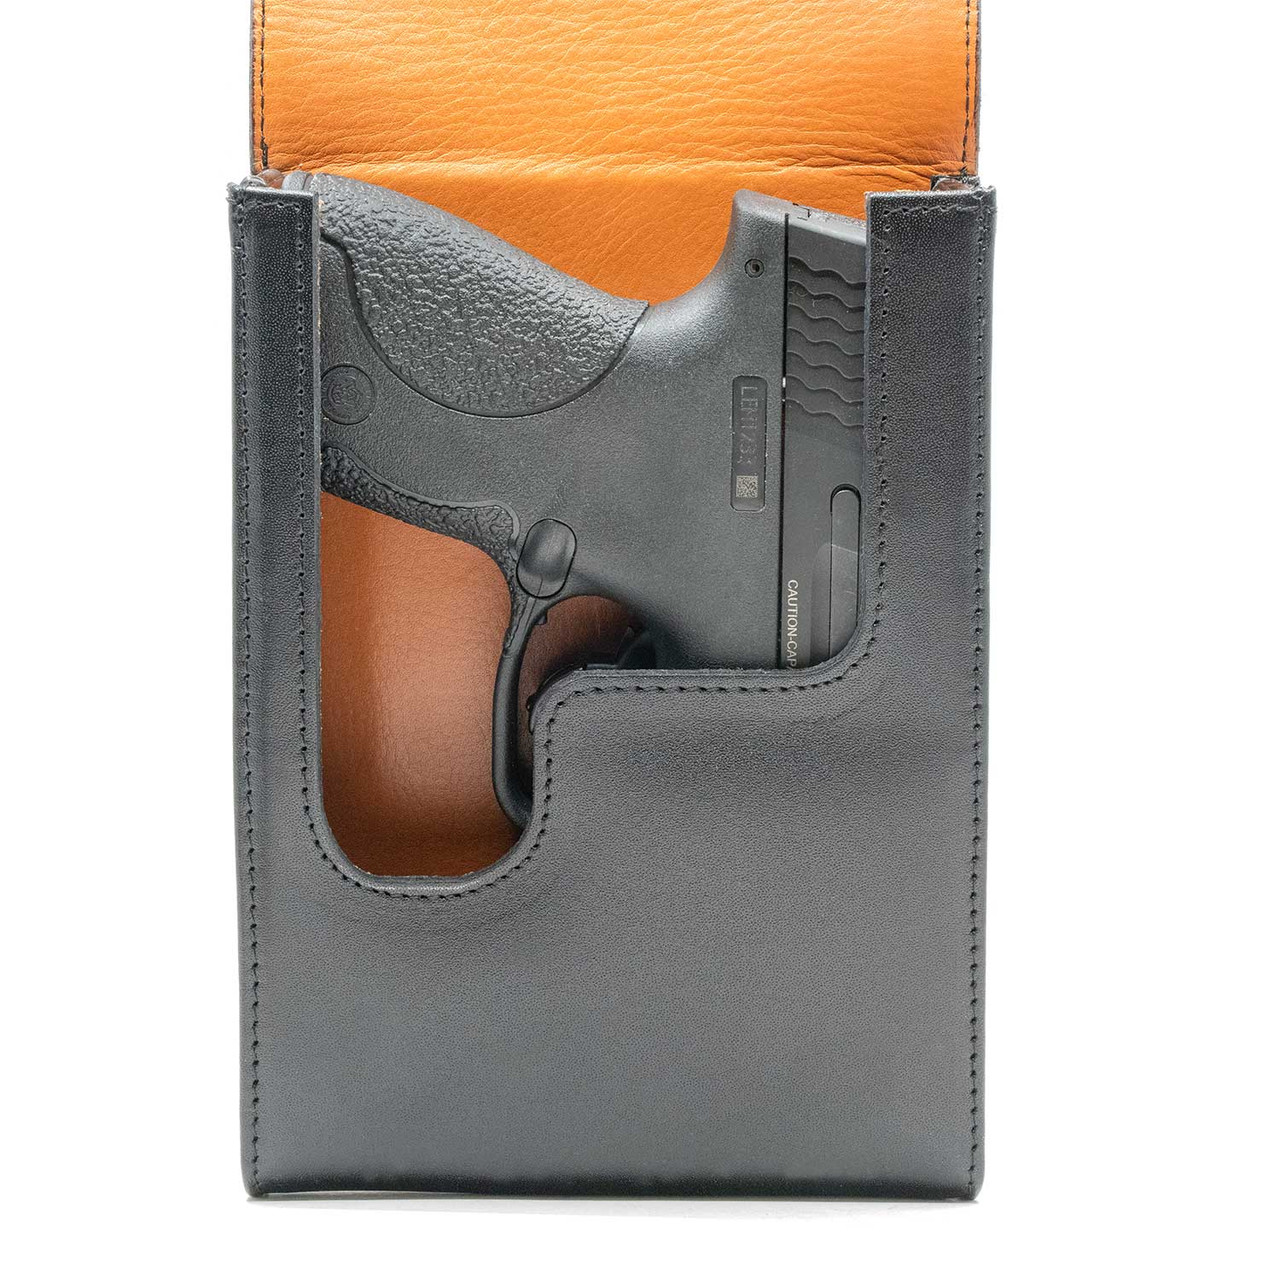 The Bersa Thunder 380 Xtra Mag Black Leather Holster